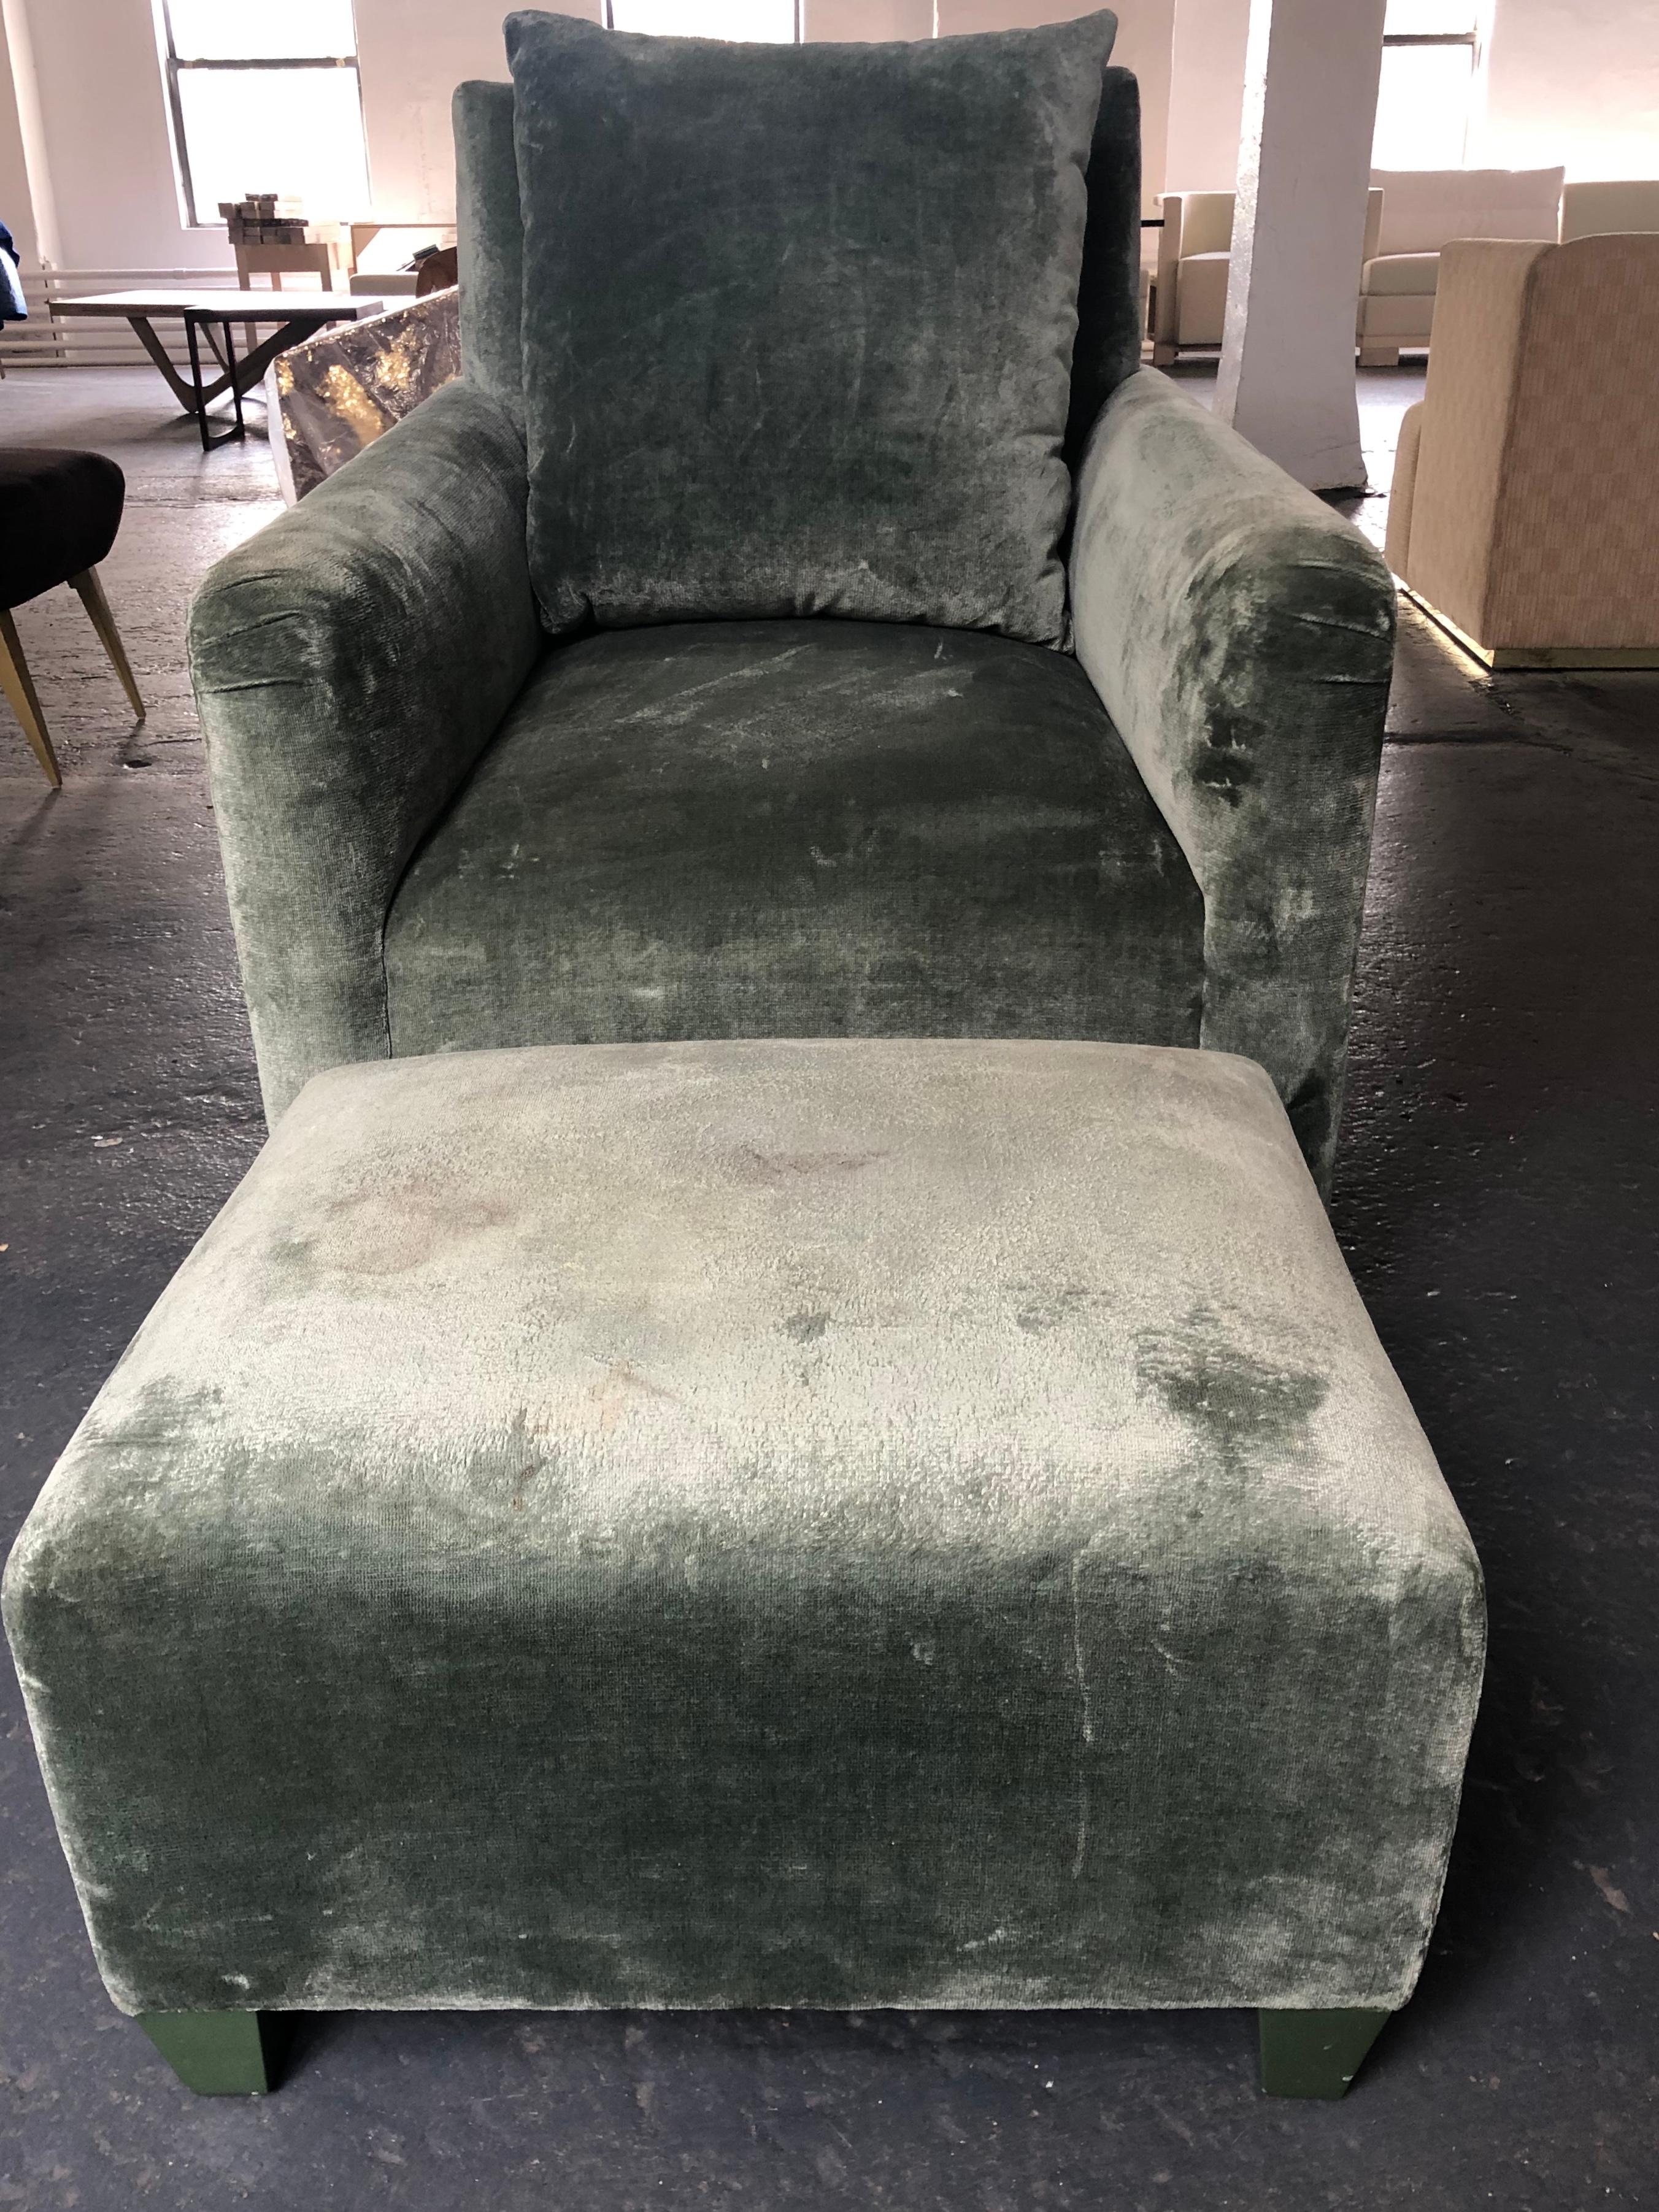 Elegant club chair and ottoman by Geoffrey Bradfield in a moss green velour. The sleek and very comfortable club chair will compliment any style. The matching ottoman is 23